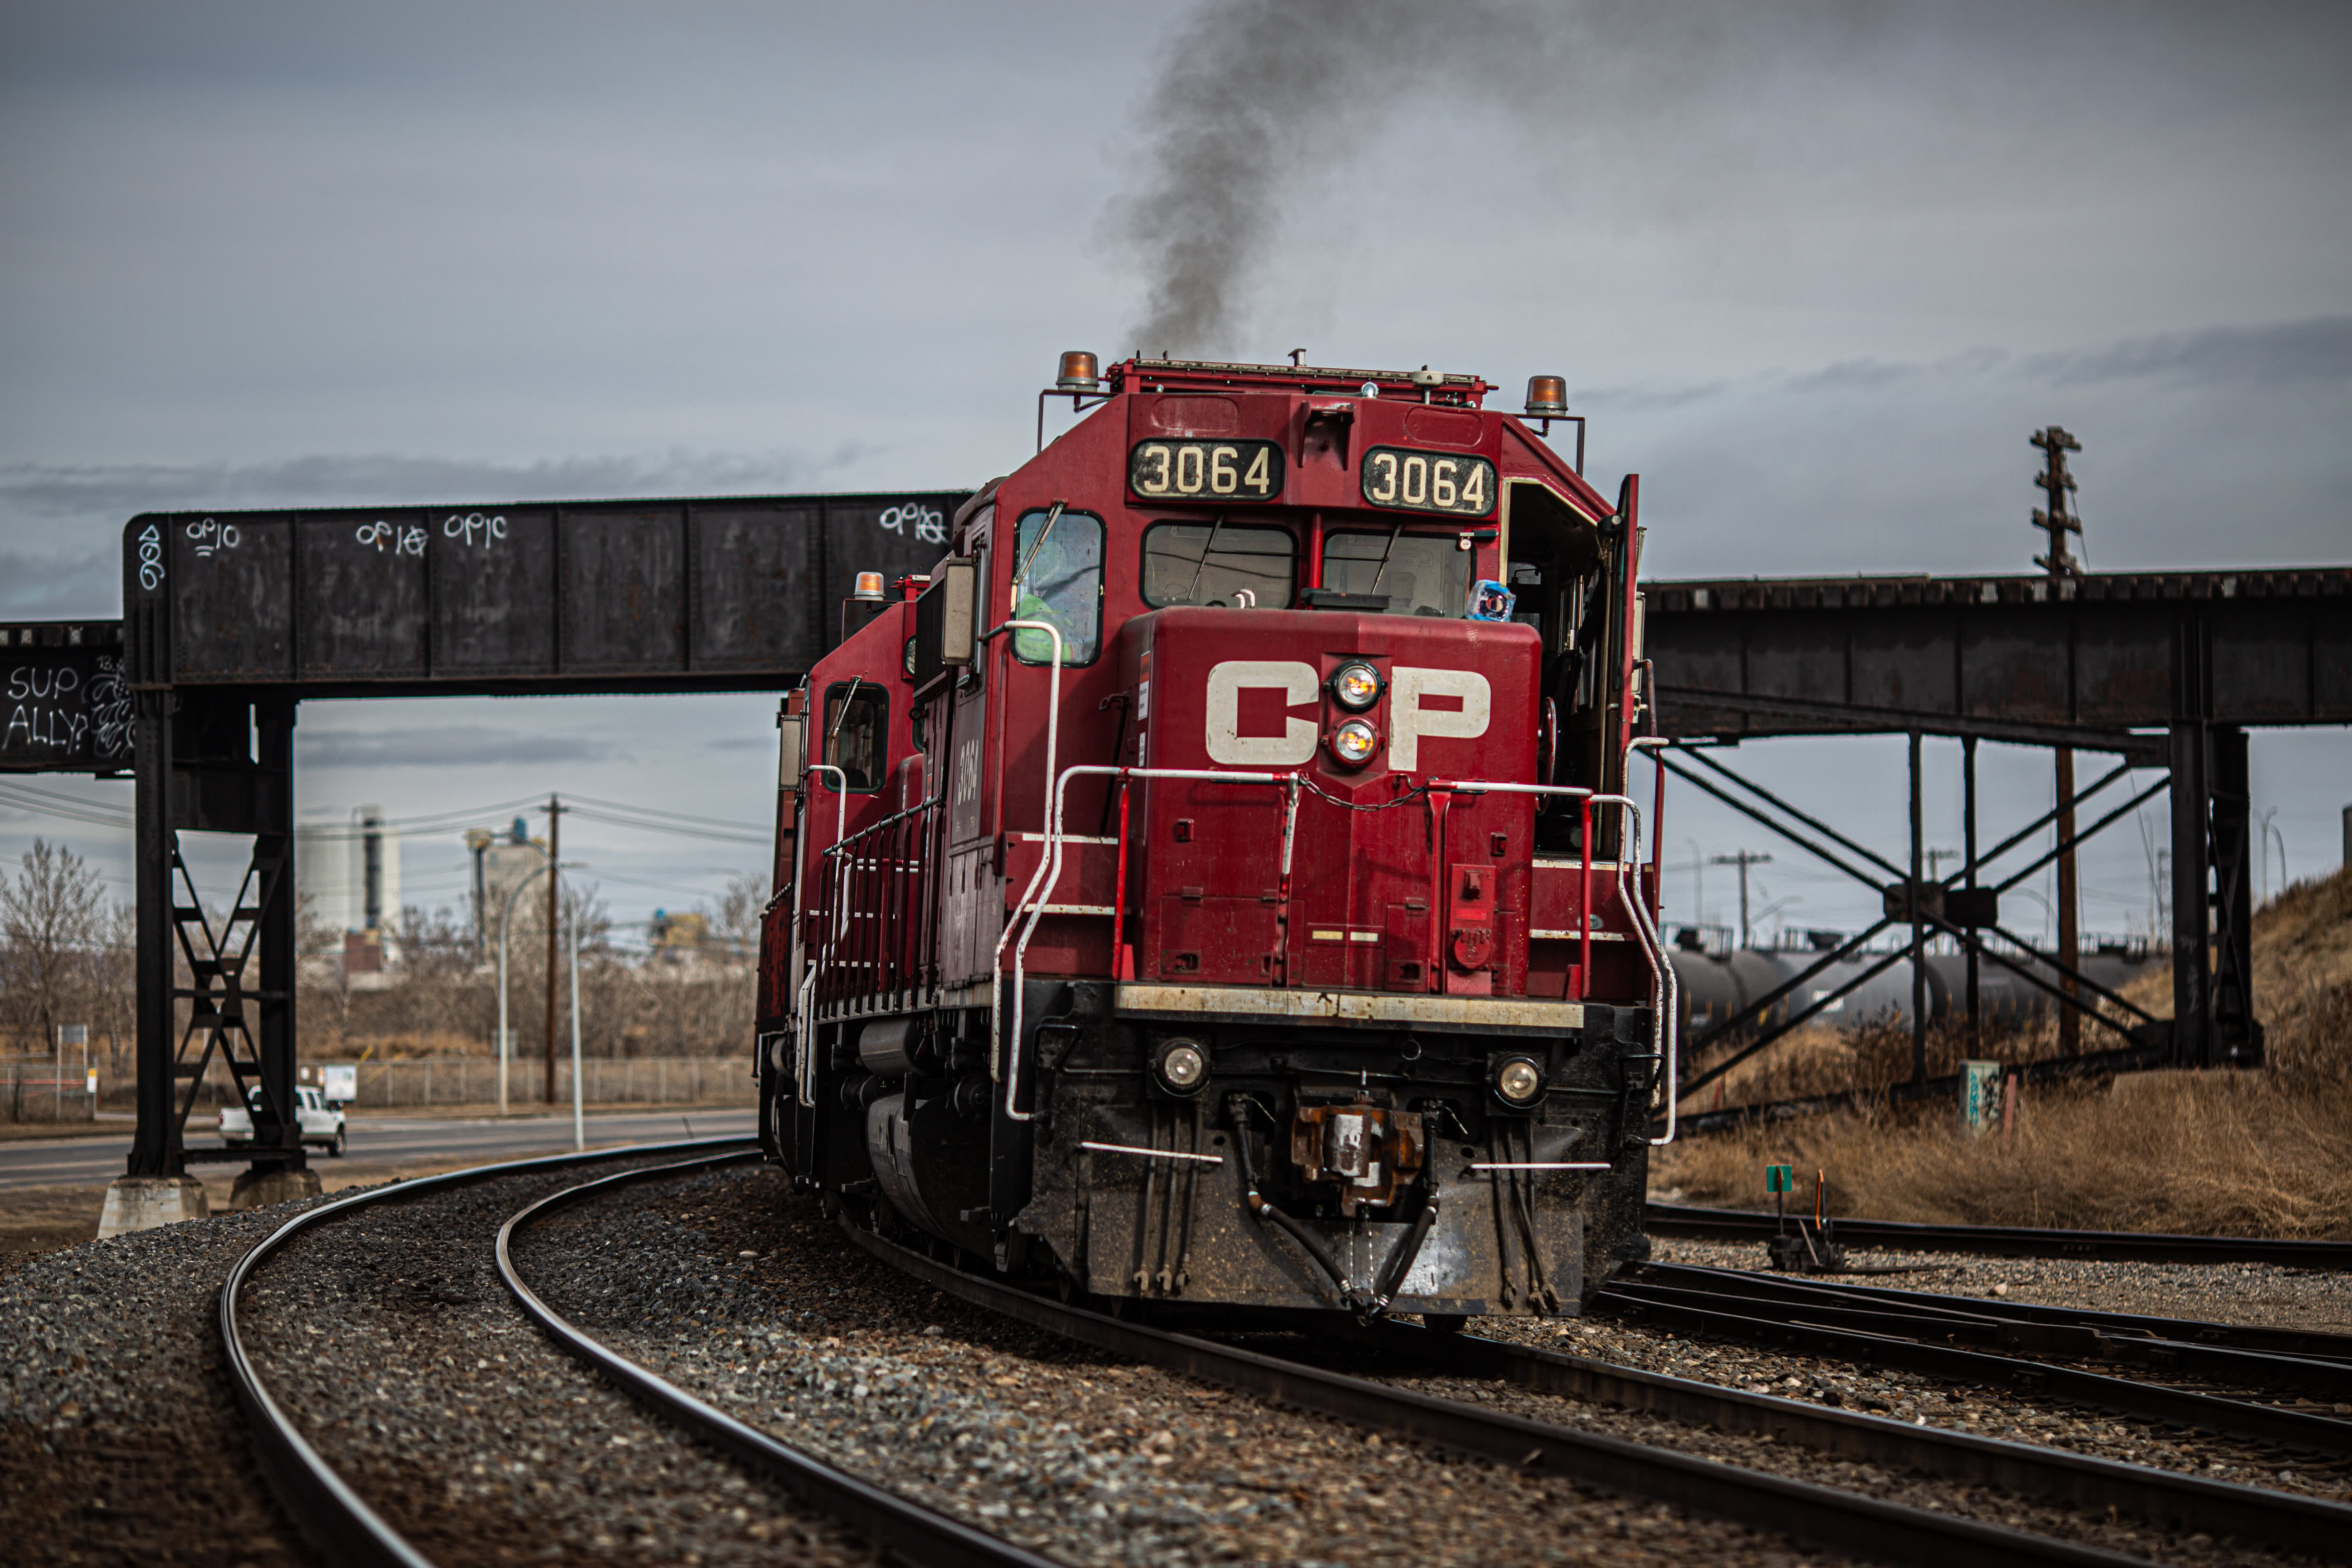 JPMorgan says this railroad stock is a top pick, citing strength in grain shipments